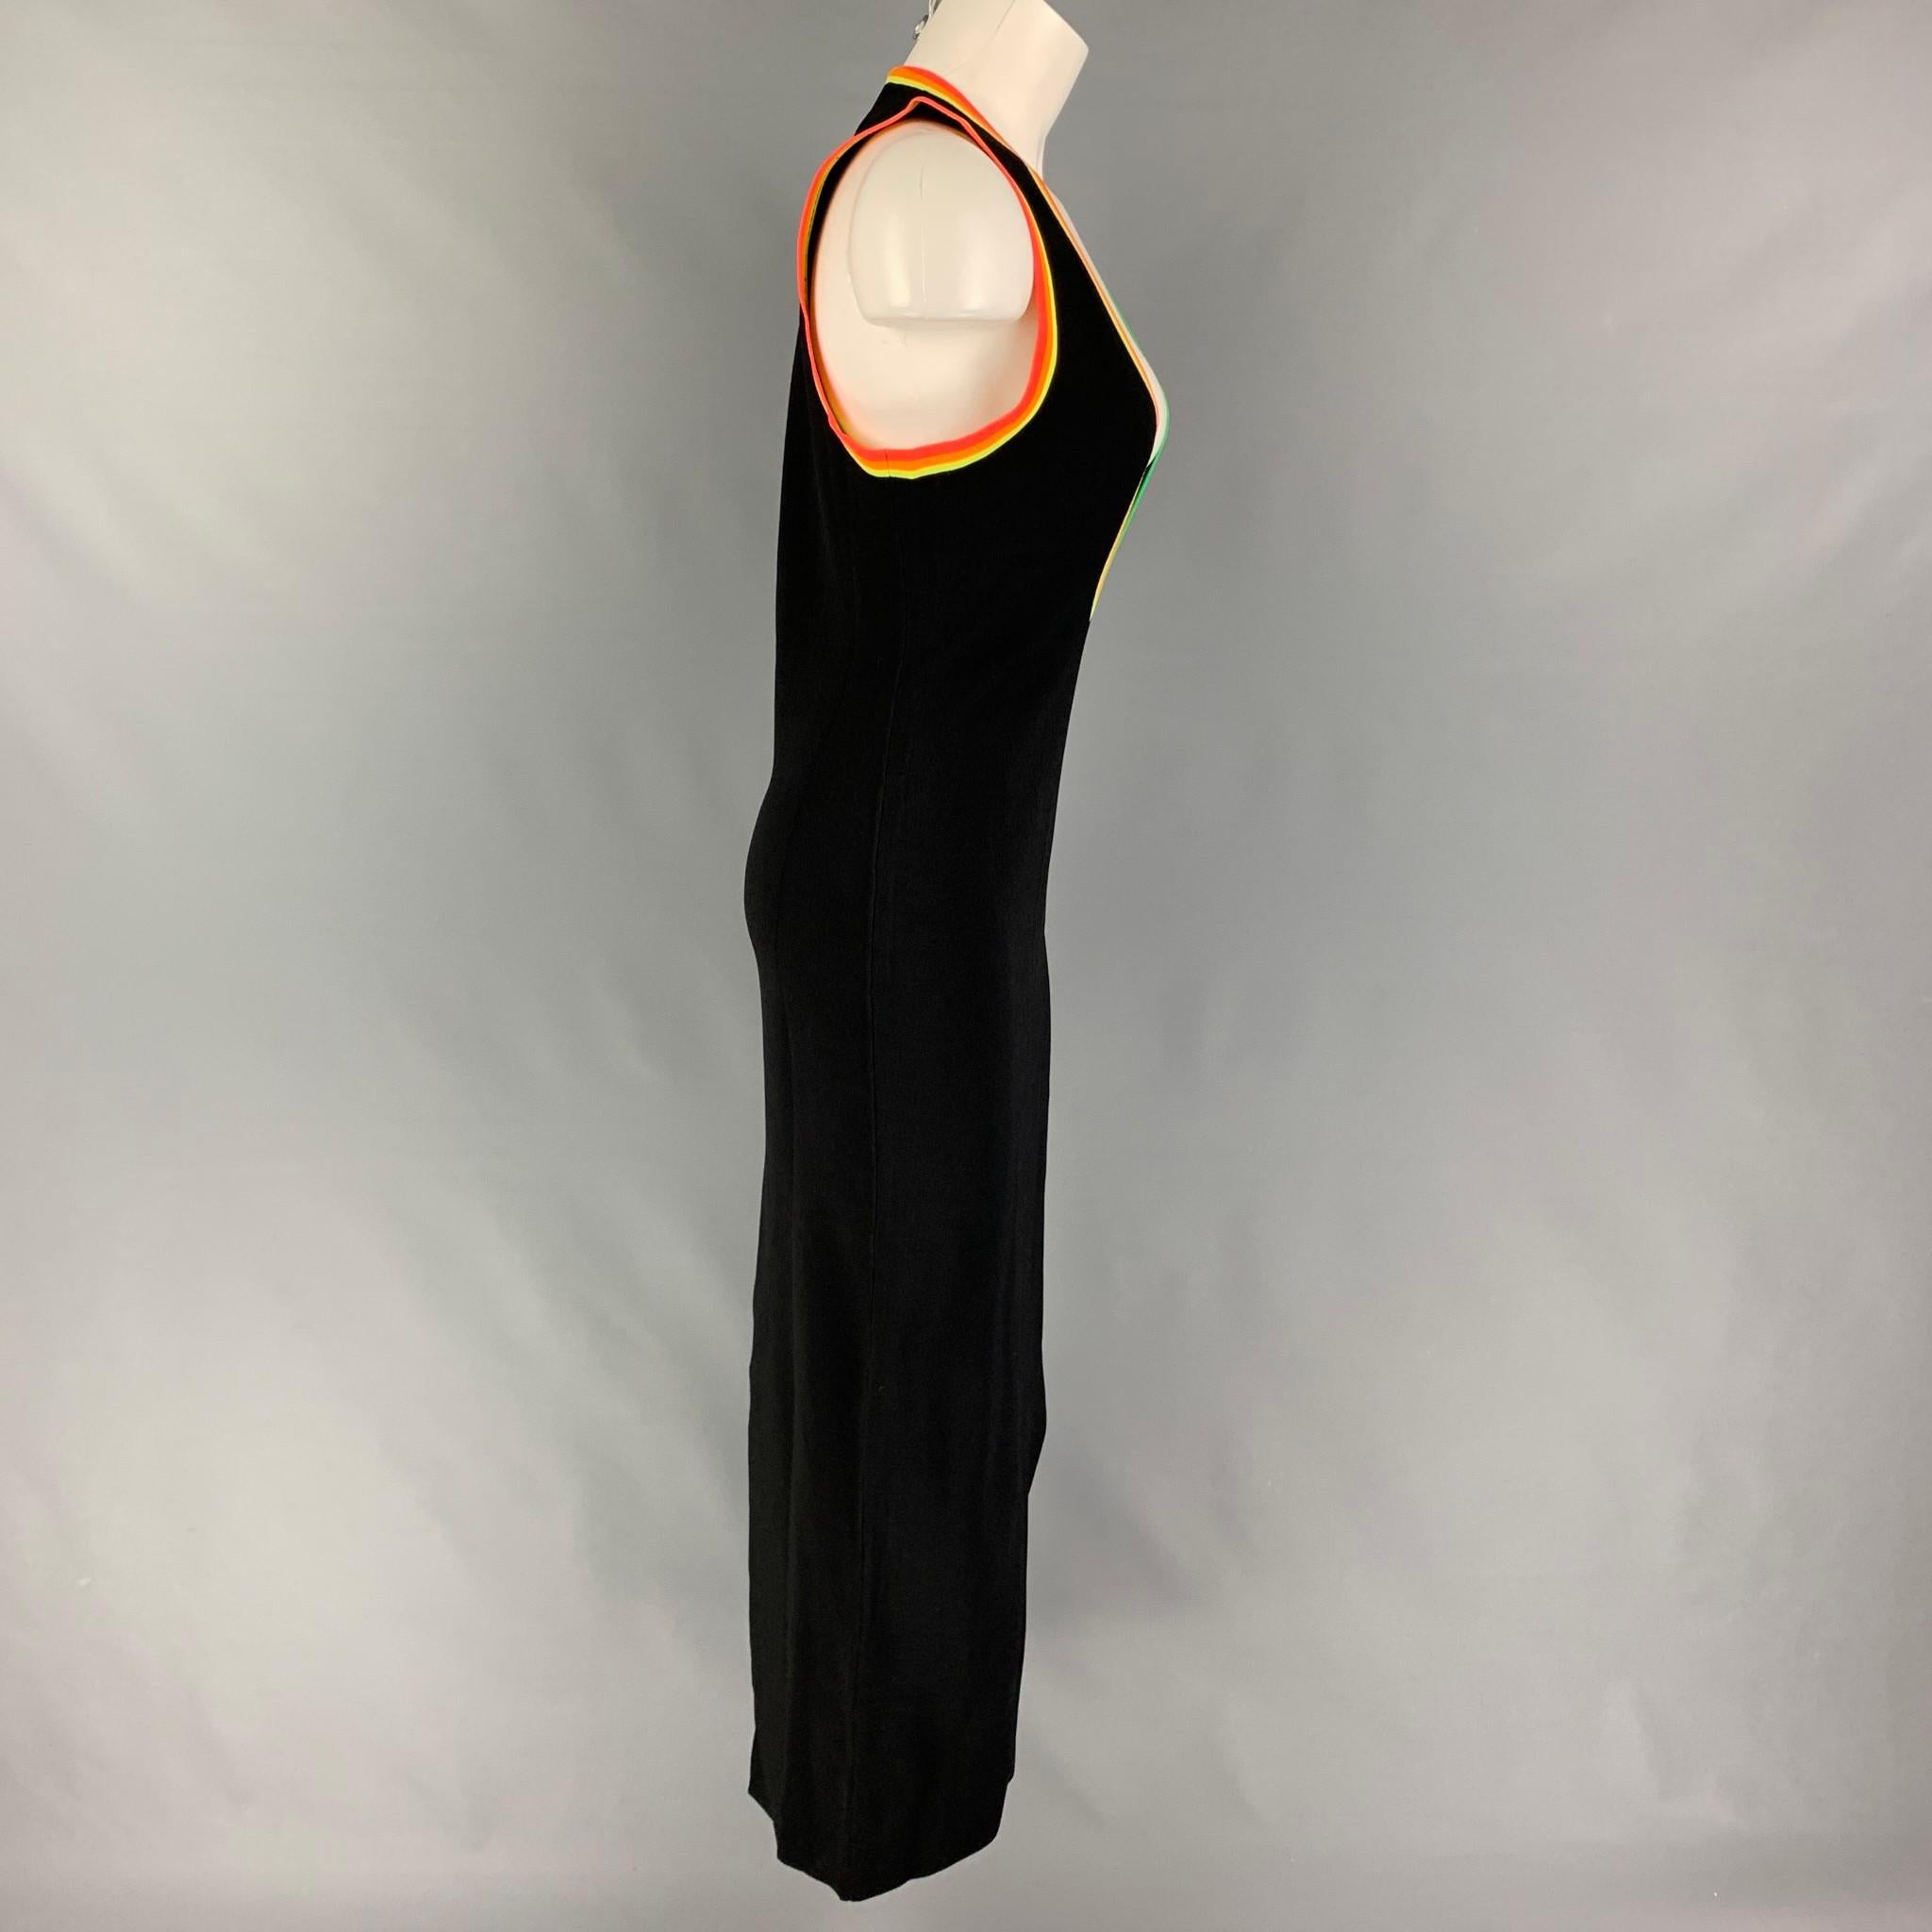 CHRISTOPHER JOHN RODGERS dress comes in a black stretch viscose blend featuring a maxi style, multi-color trim v-neckline, sleeveless, and a back slit detail. 

New With Tags. 
Marked: M
Original Retail Price: $1,125.00

Measurements:

Shoulder: